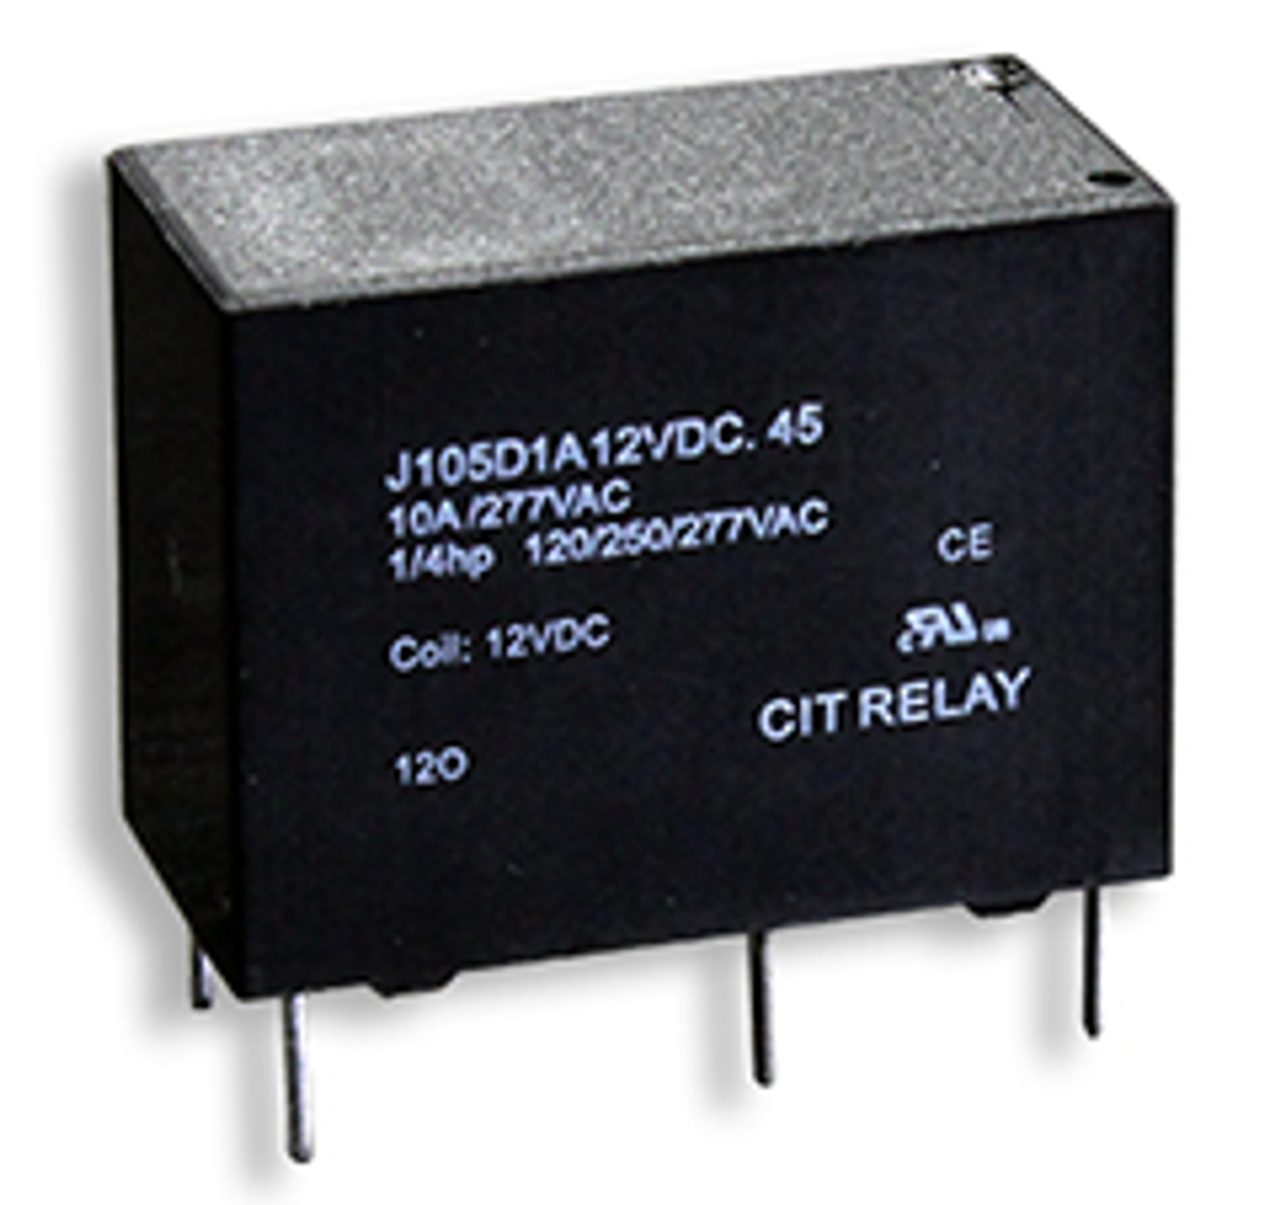 CIT Relay and Switch J105D1AS9VDC.20 Power Relays